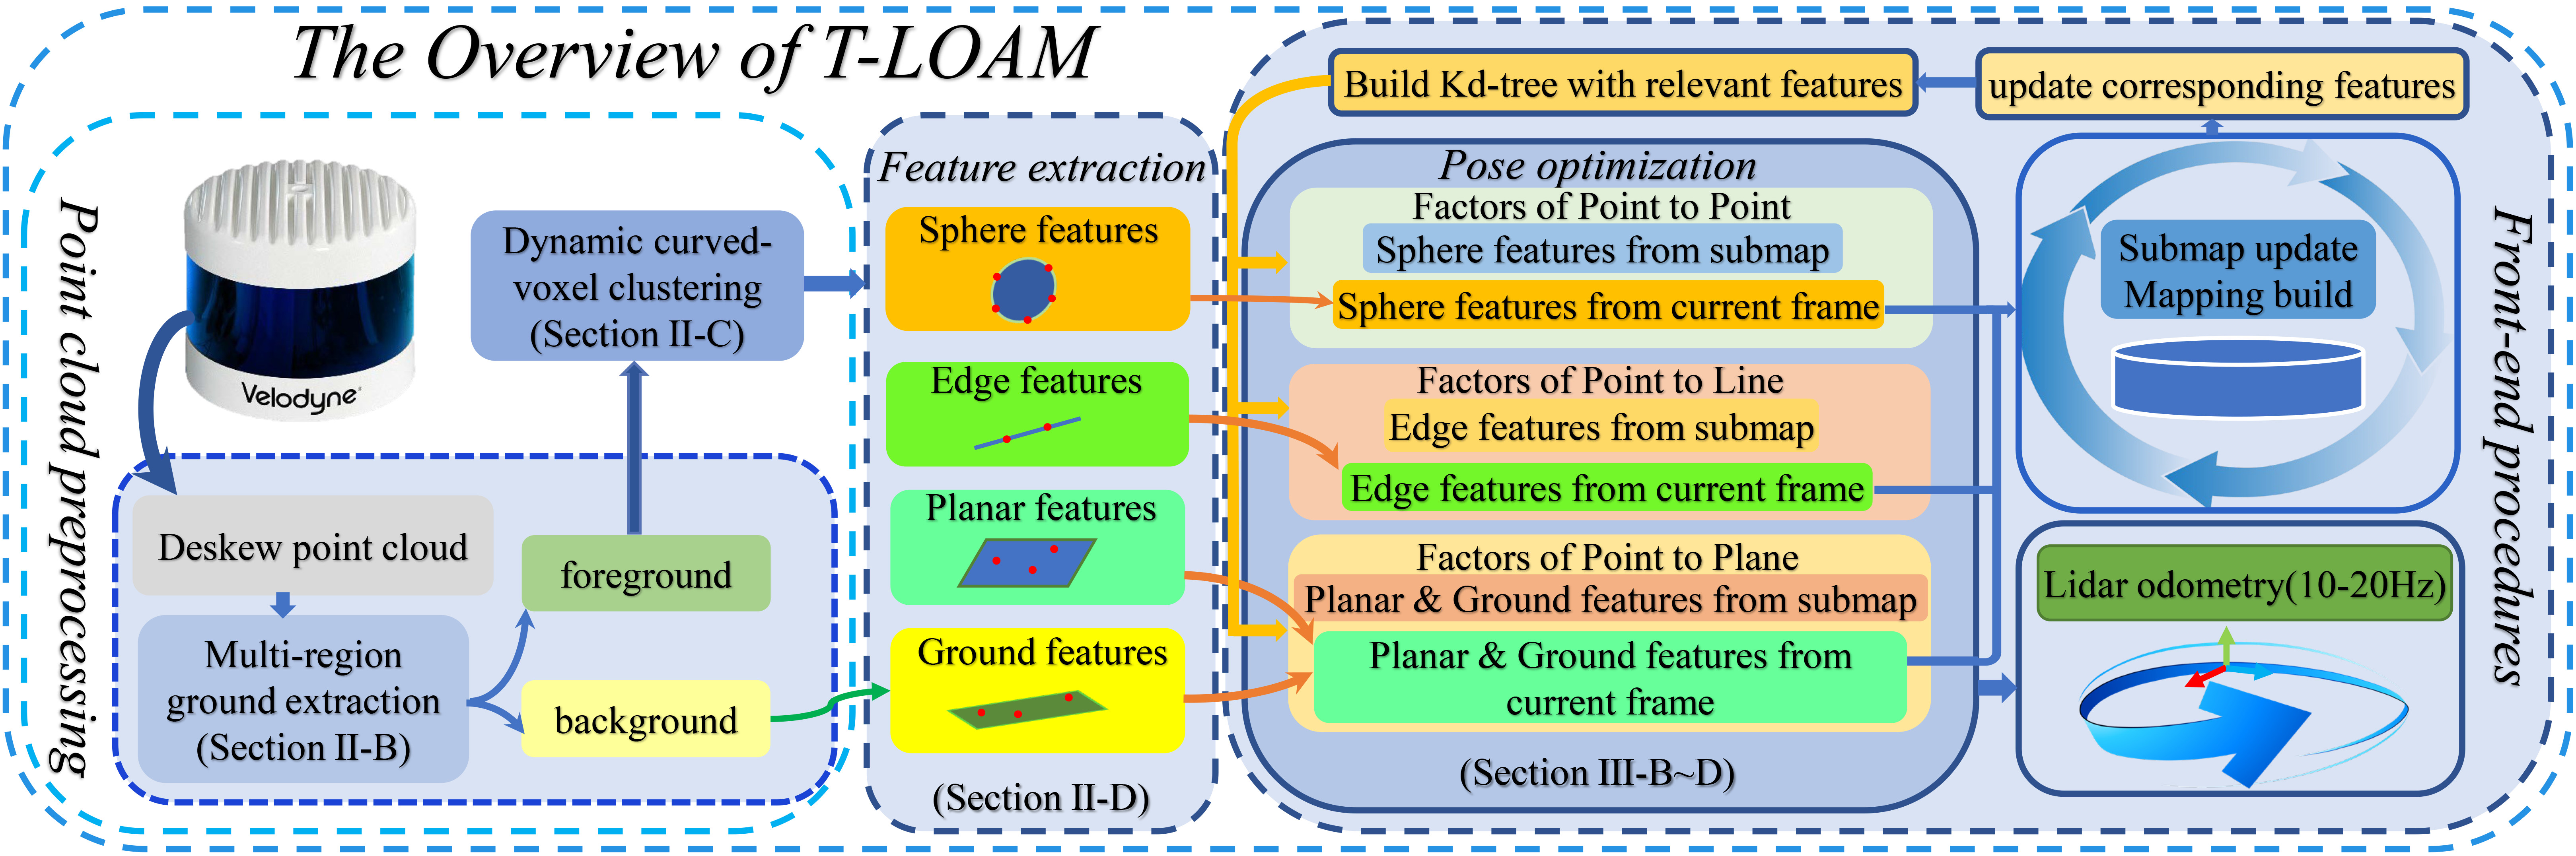 tloam_overview.png